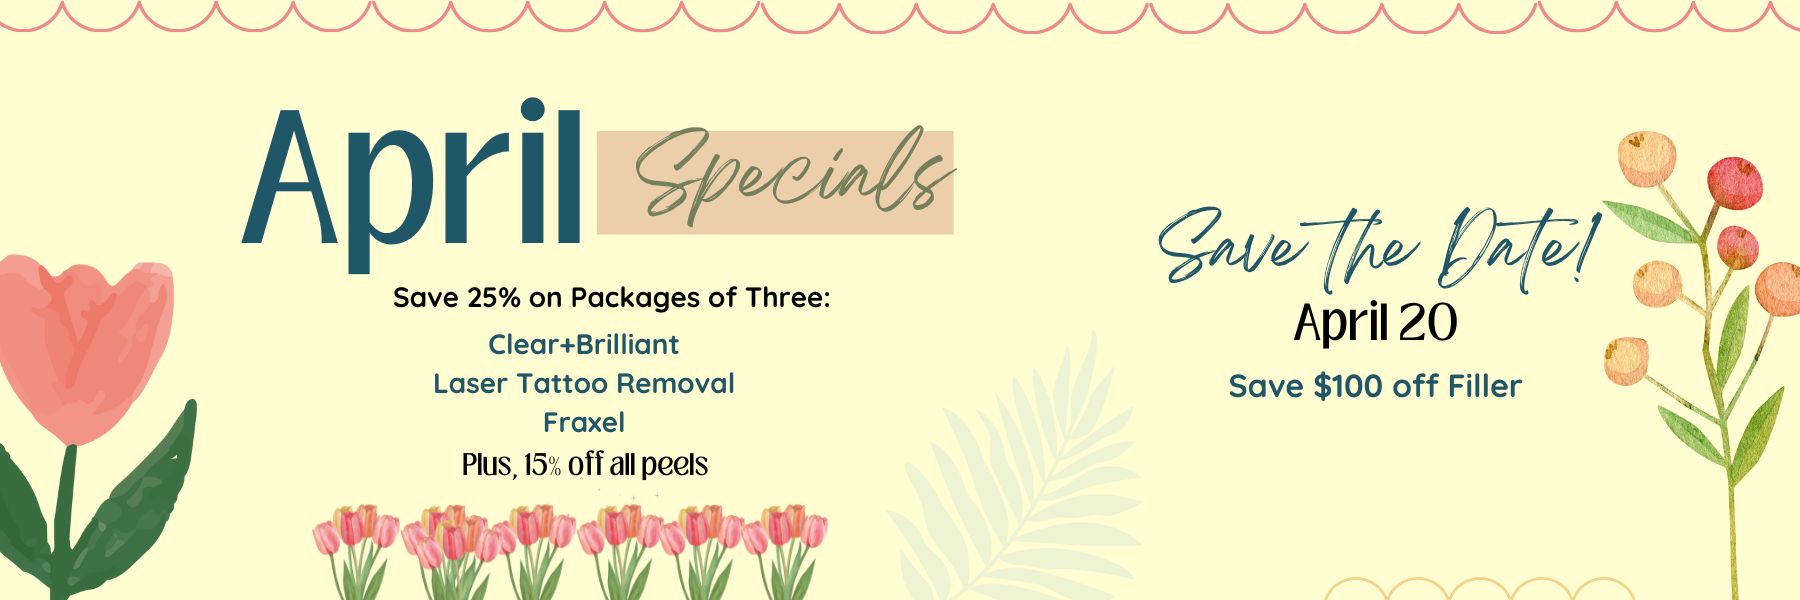 Sparkly blue cover photo with package discounts